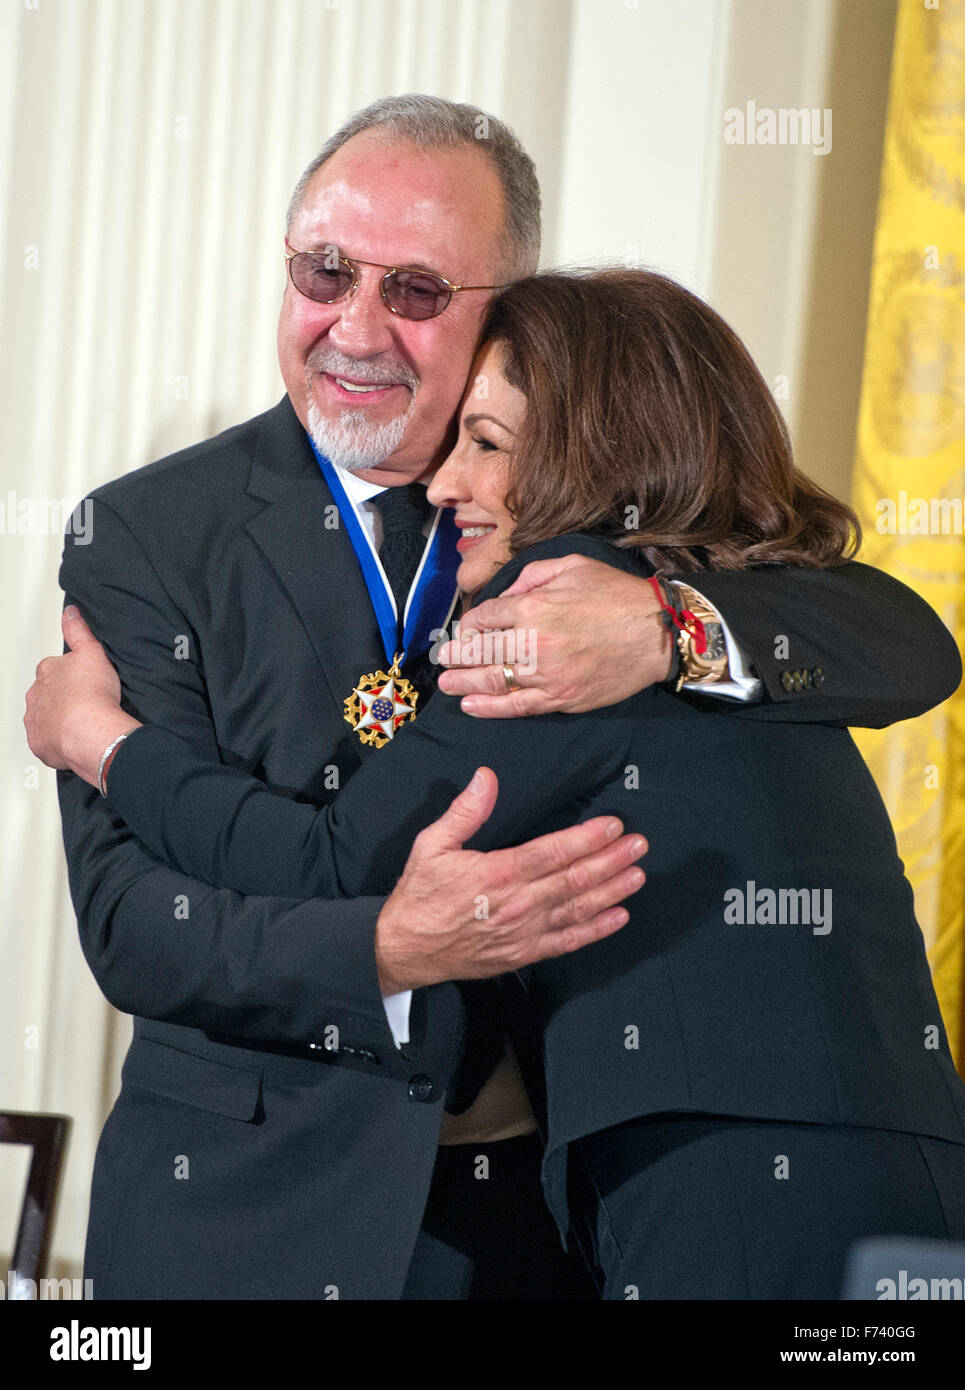 Presidential Medal of Freedom recipients Gloria and Emilio Estefan share a hug following the ceremony in the East Room of the White House in Washington, DC on Tuesday, November 24, 2015. The Medal is the highest US civilian honor, presented to individuals who have made especially meritorious contributions to the security or national interests of the US, to world peace, or to cultural or significant public or private endeavors. Photo: Ron Sachs/CNP/dpa - NO WIRE SERVICE - Stock Photo